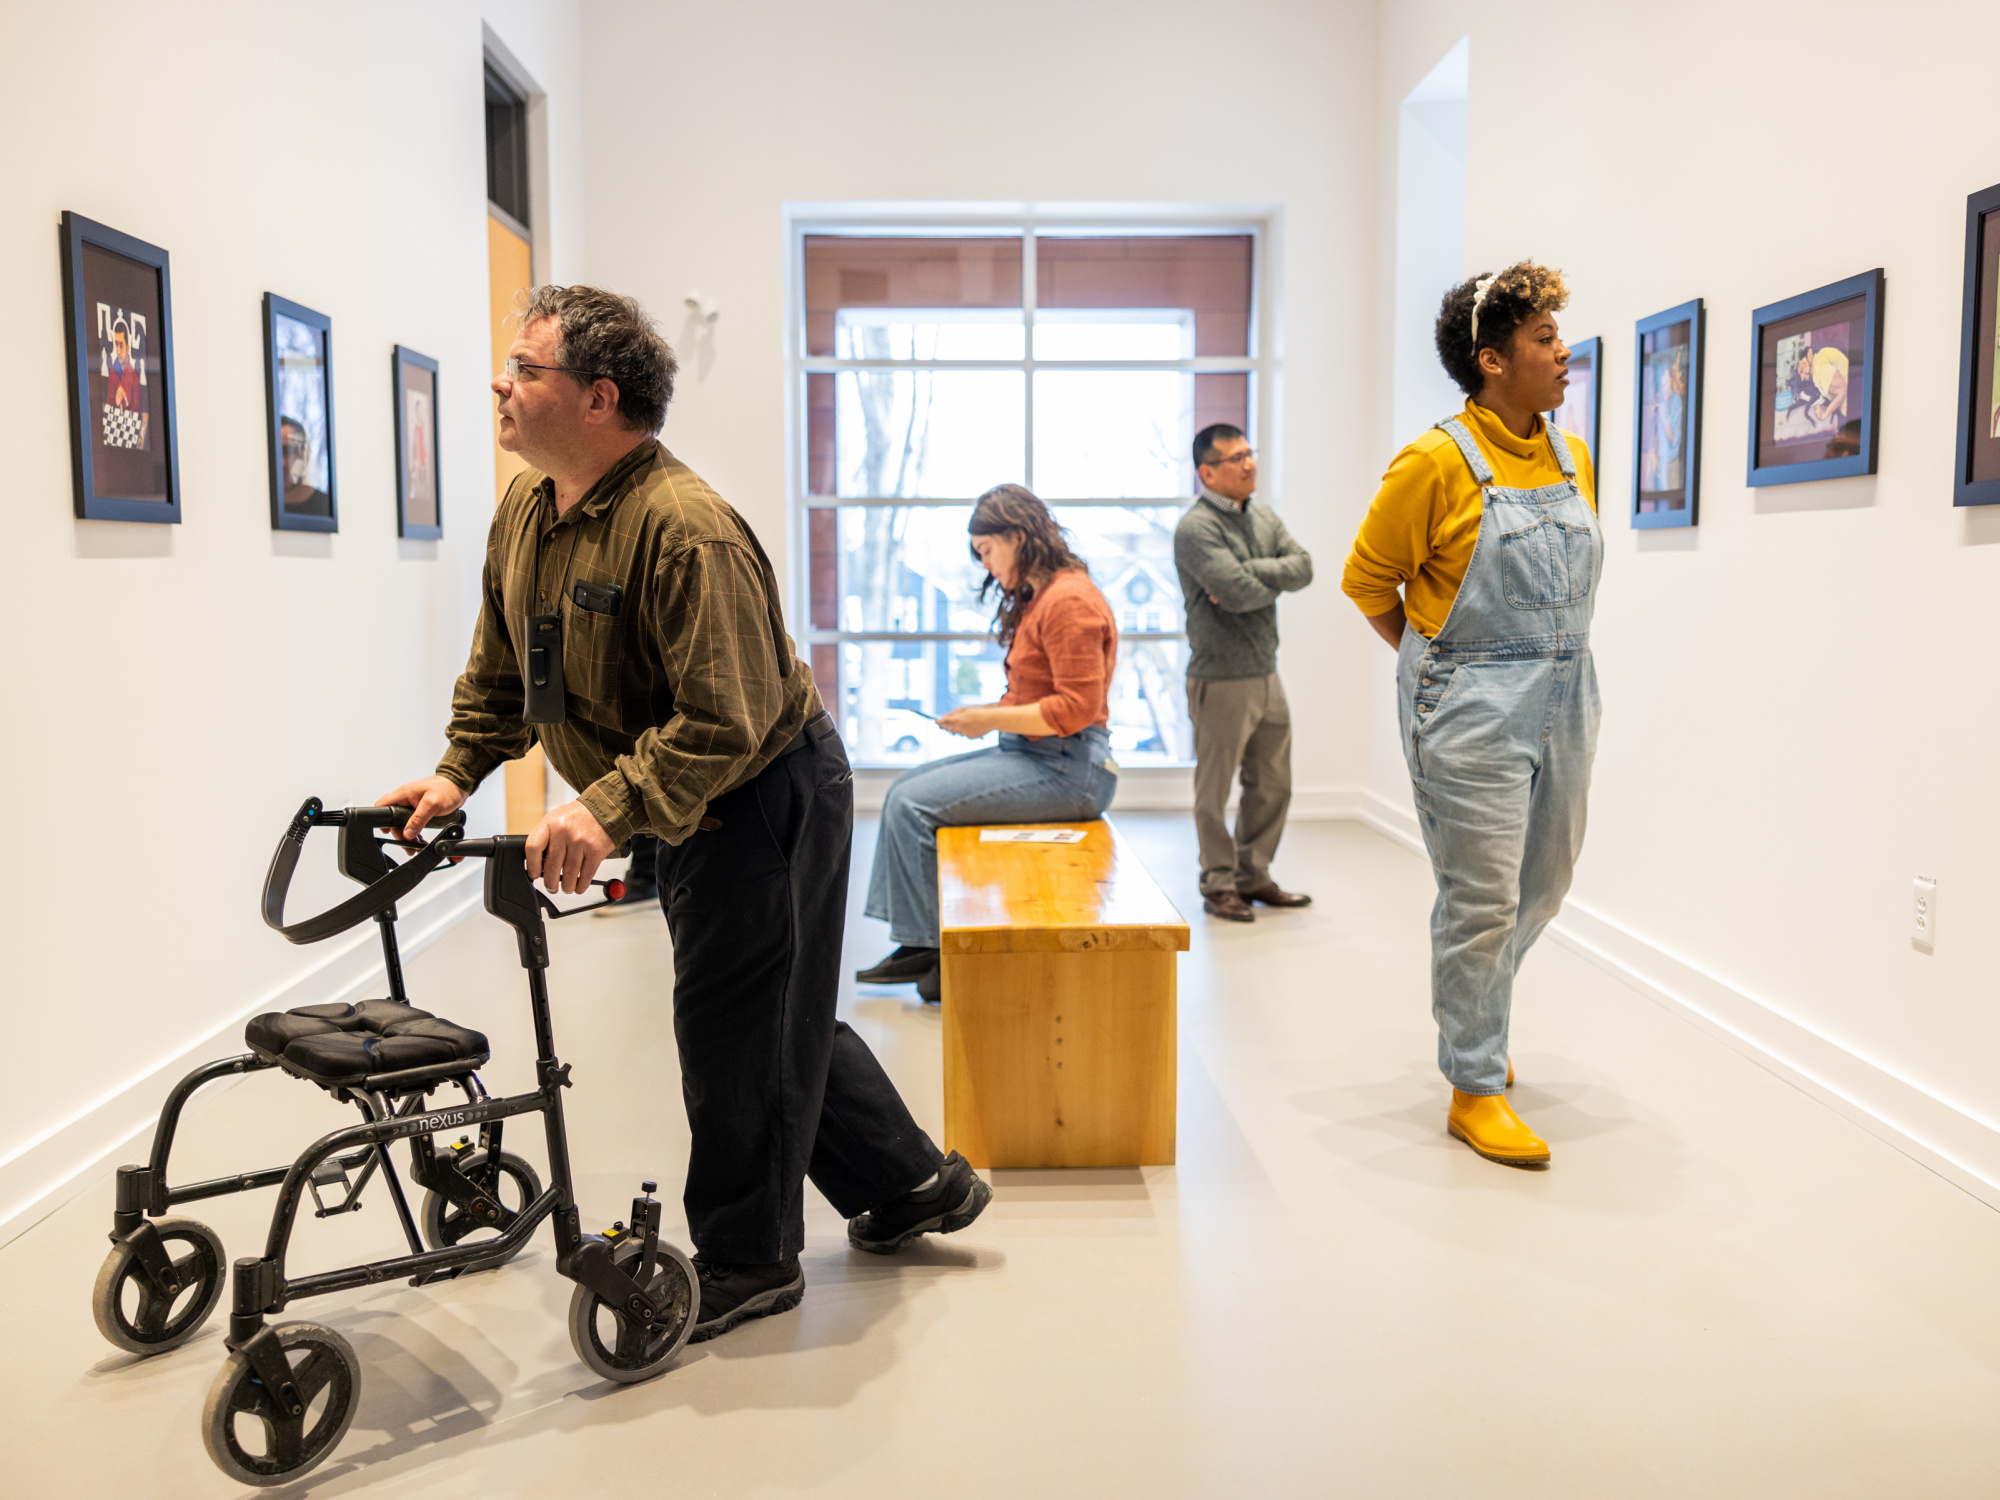 Photo of people, including a person using a walker, looking at art in a gallery setting